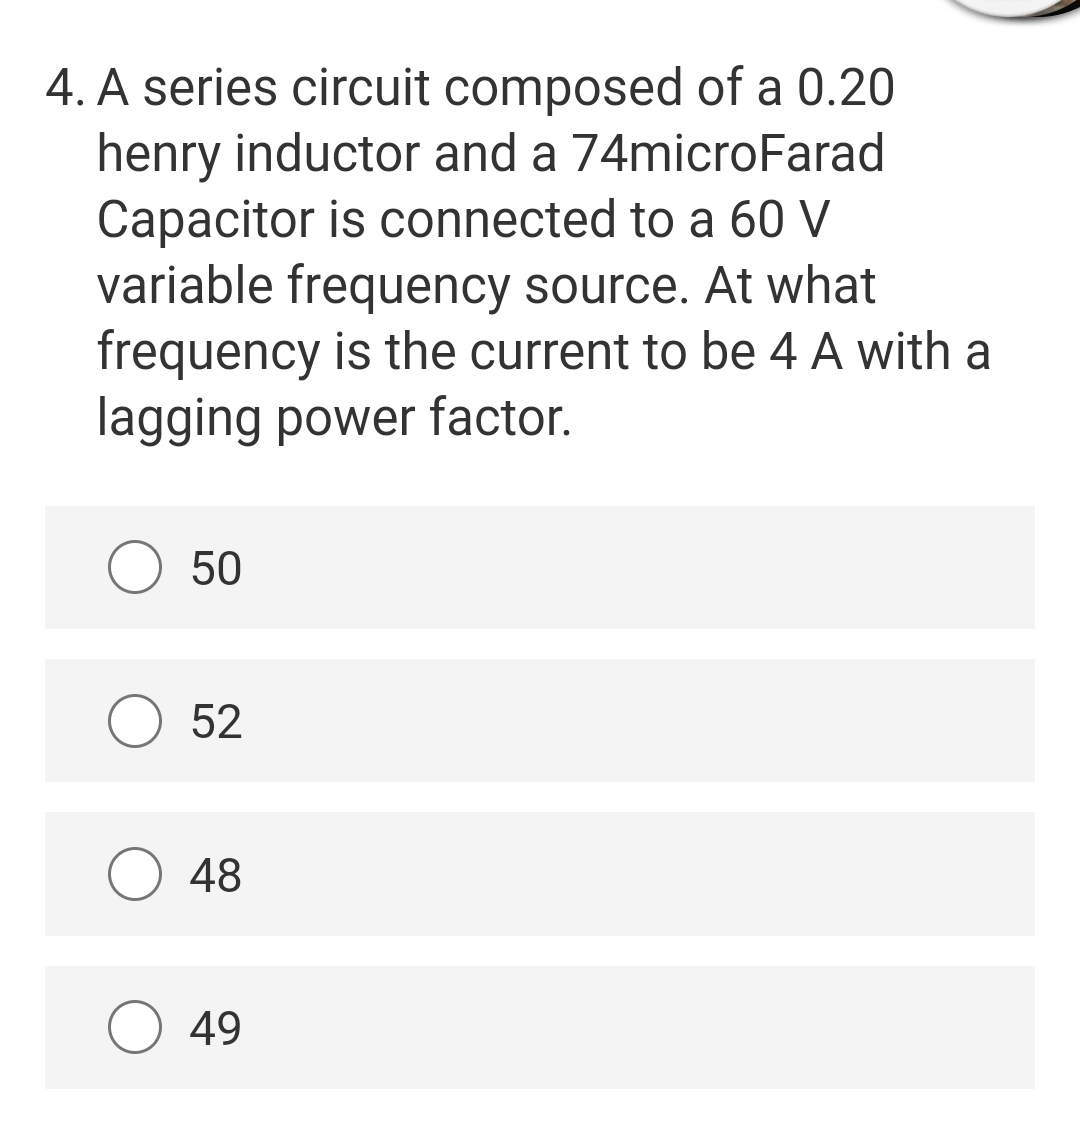 4. A series circuit composed of a 0.20
henry inductor and a 74microFarad
Capacitor is connected to a 60 V
variable frequency source. At what
frequency is the current to be 4 A with a
lagging power factor.
50
52
48
49
